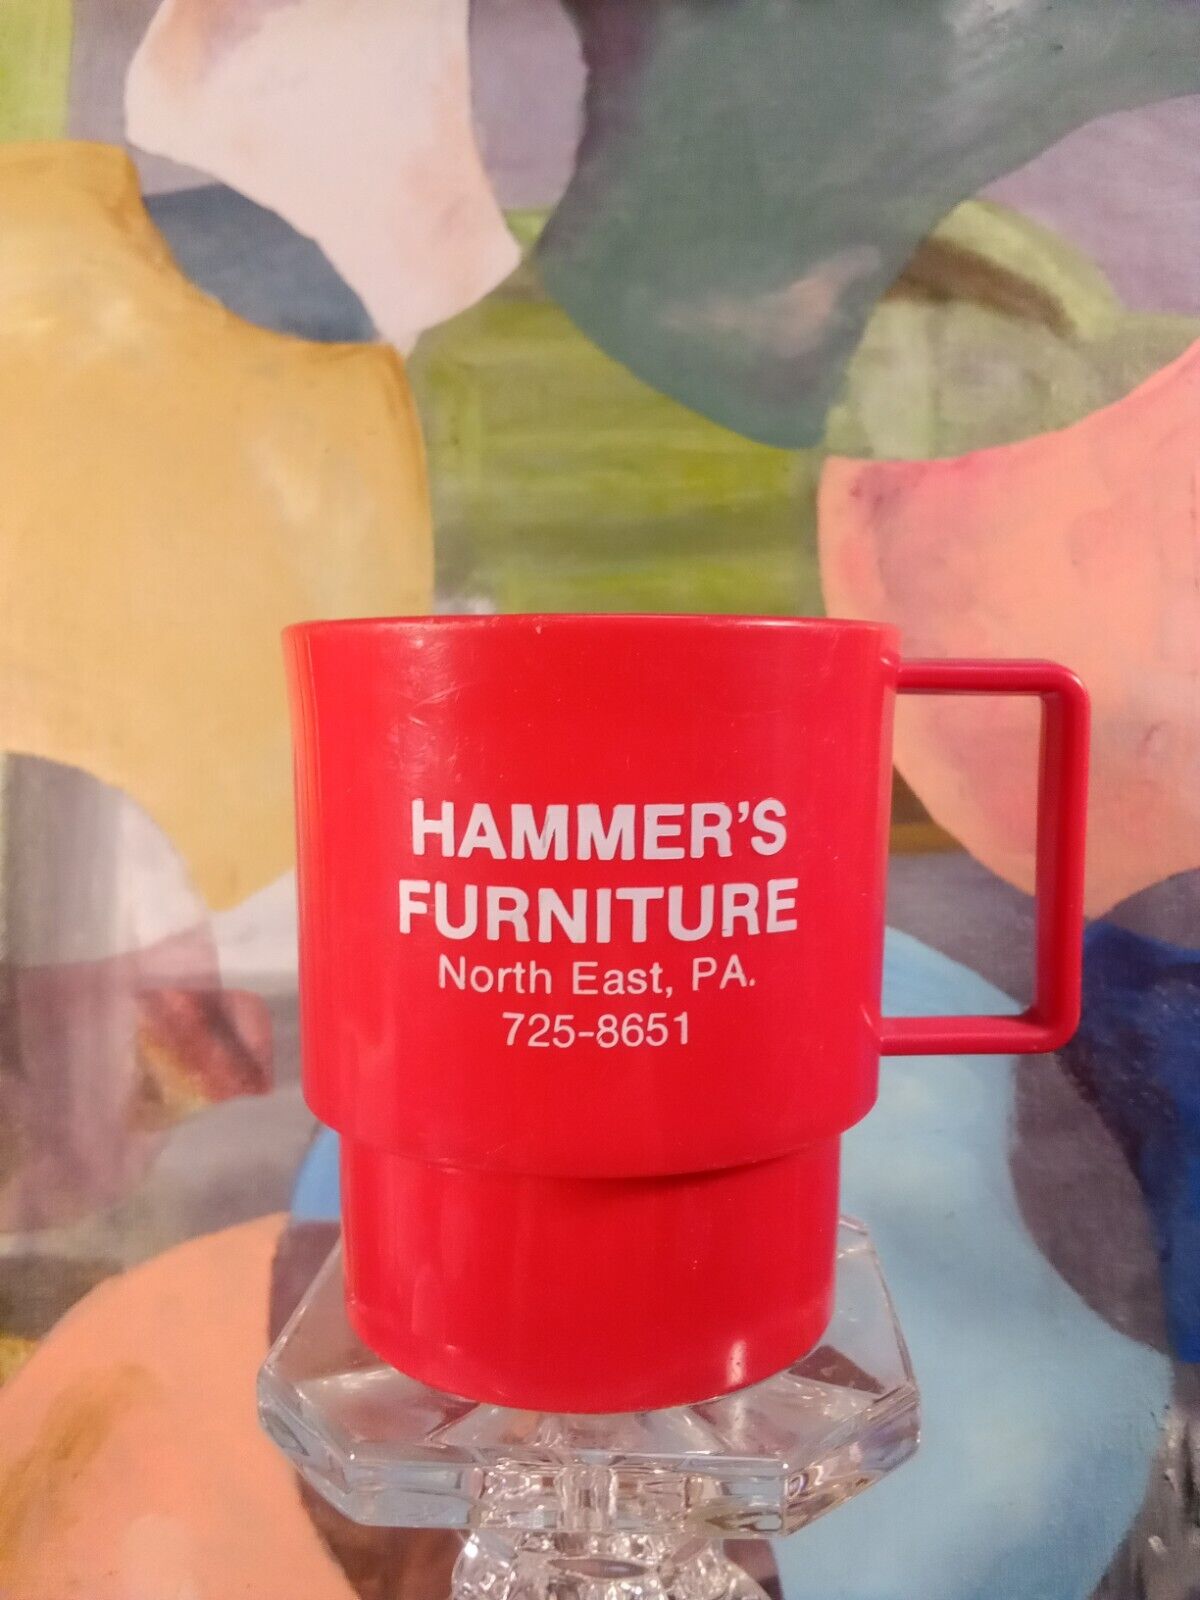 Hammer\'s Furniture North East, Pennsylvania NW PA Promotional Red Plastic Mug